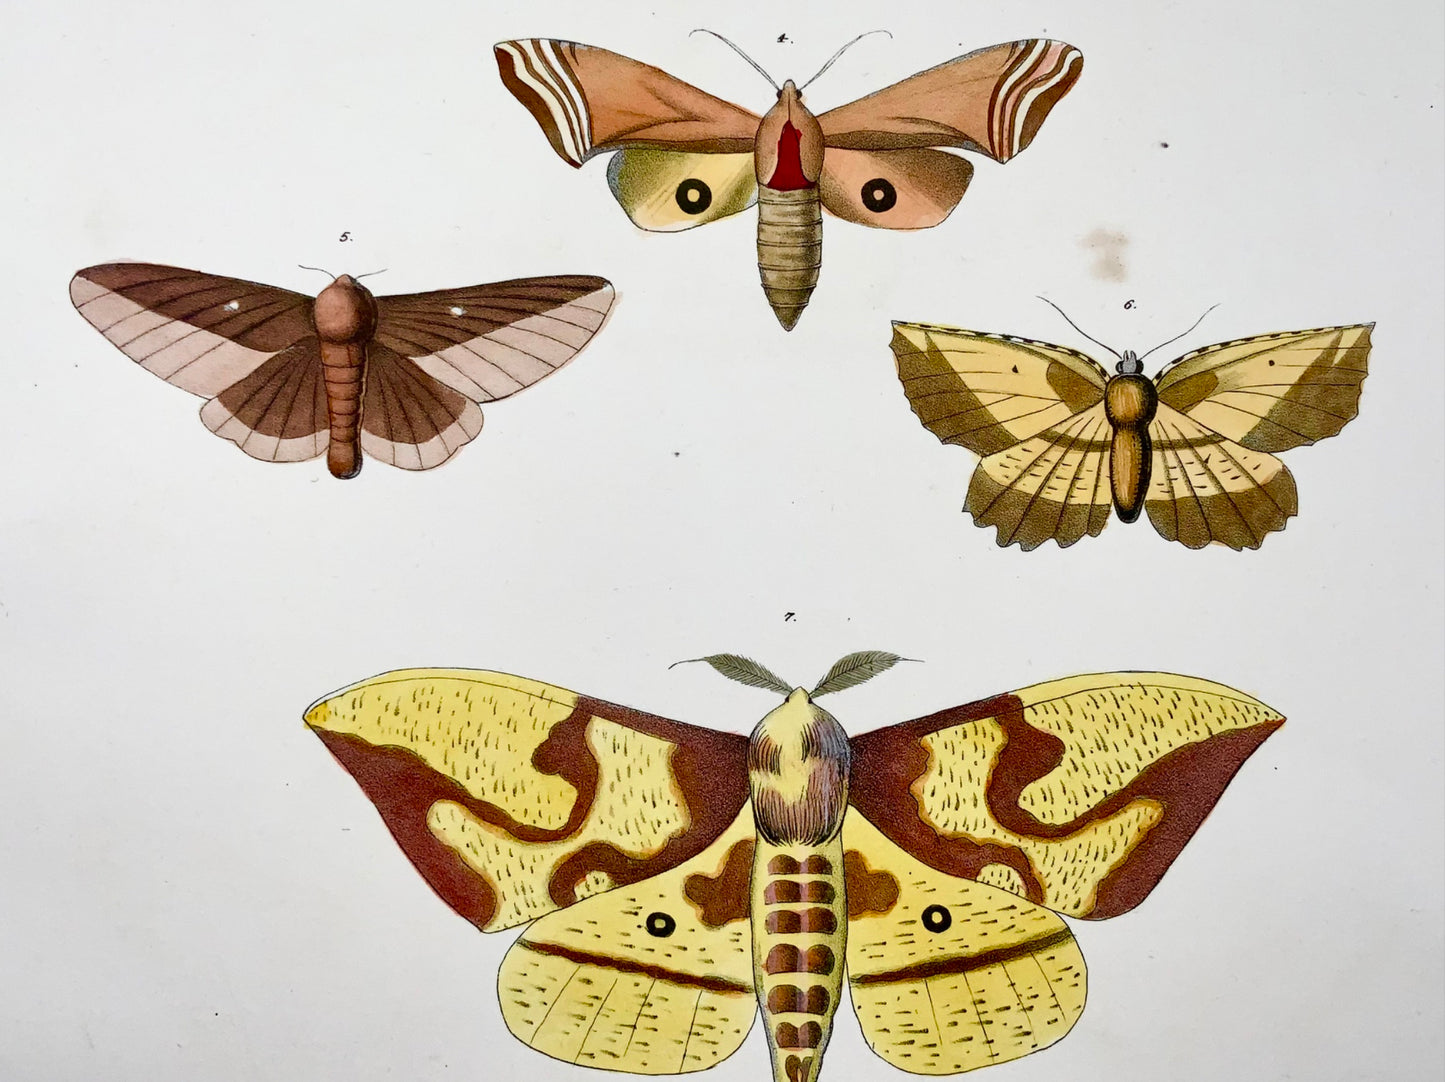 1854 Pease lith; Emmons - Butterflies Moths - hand coloured stone lithograph